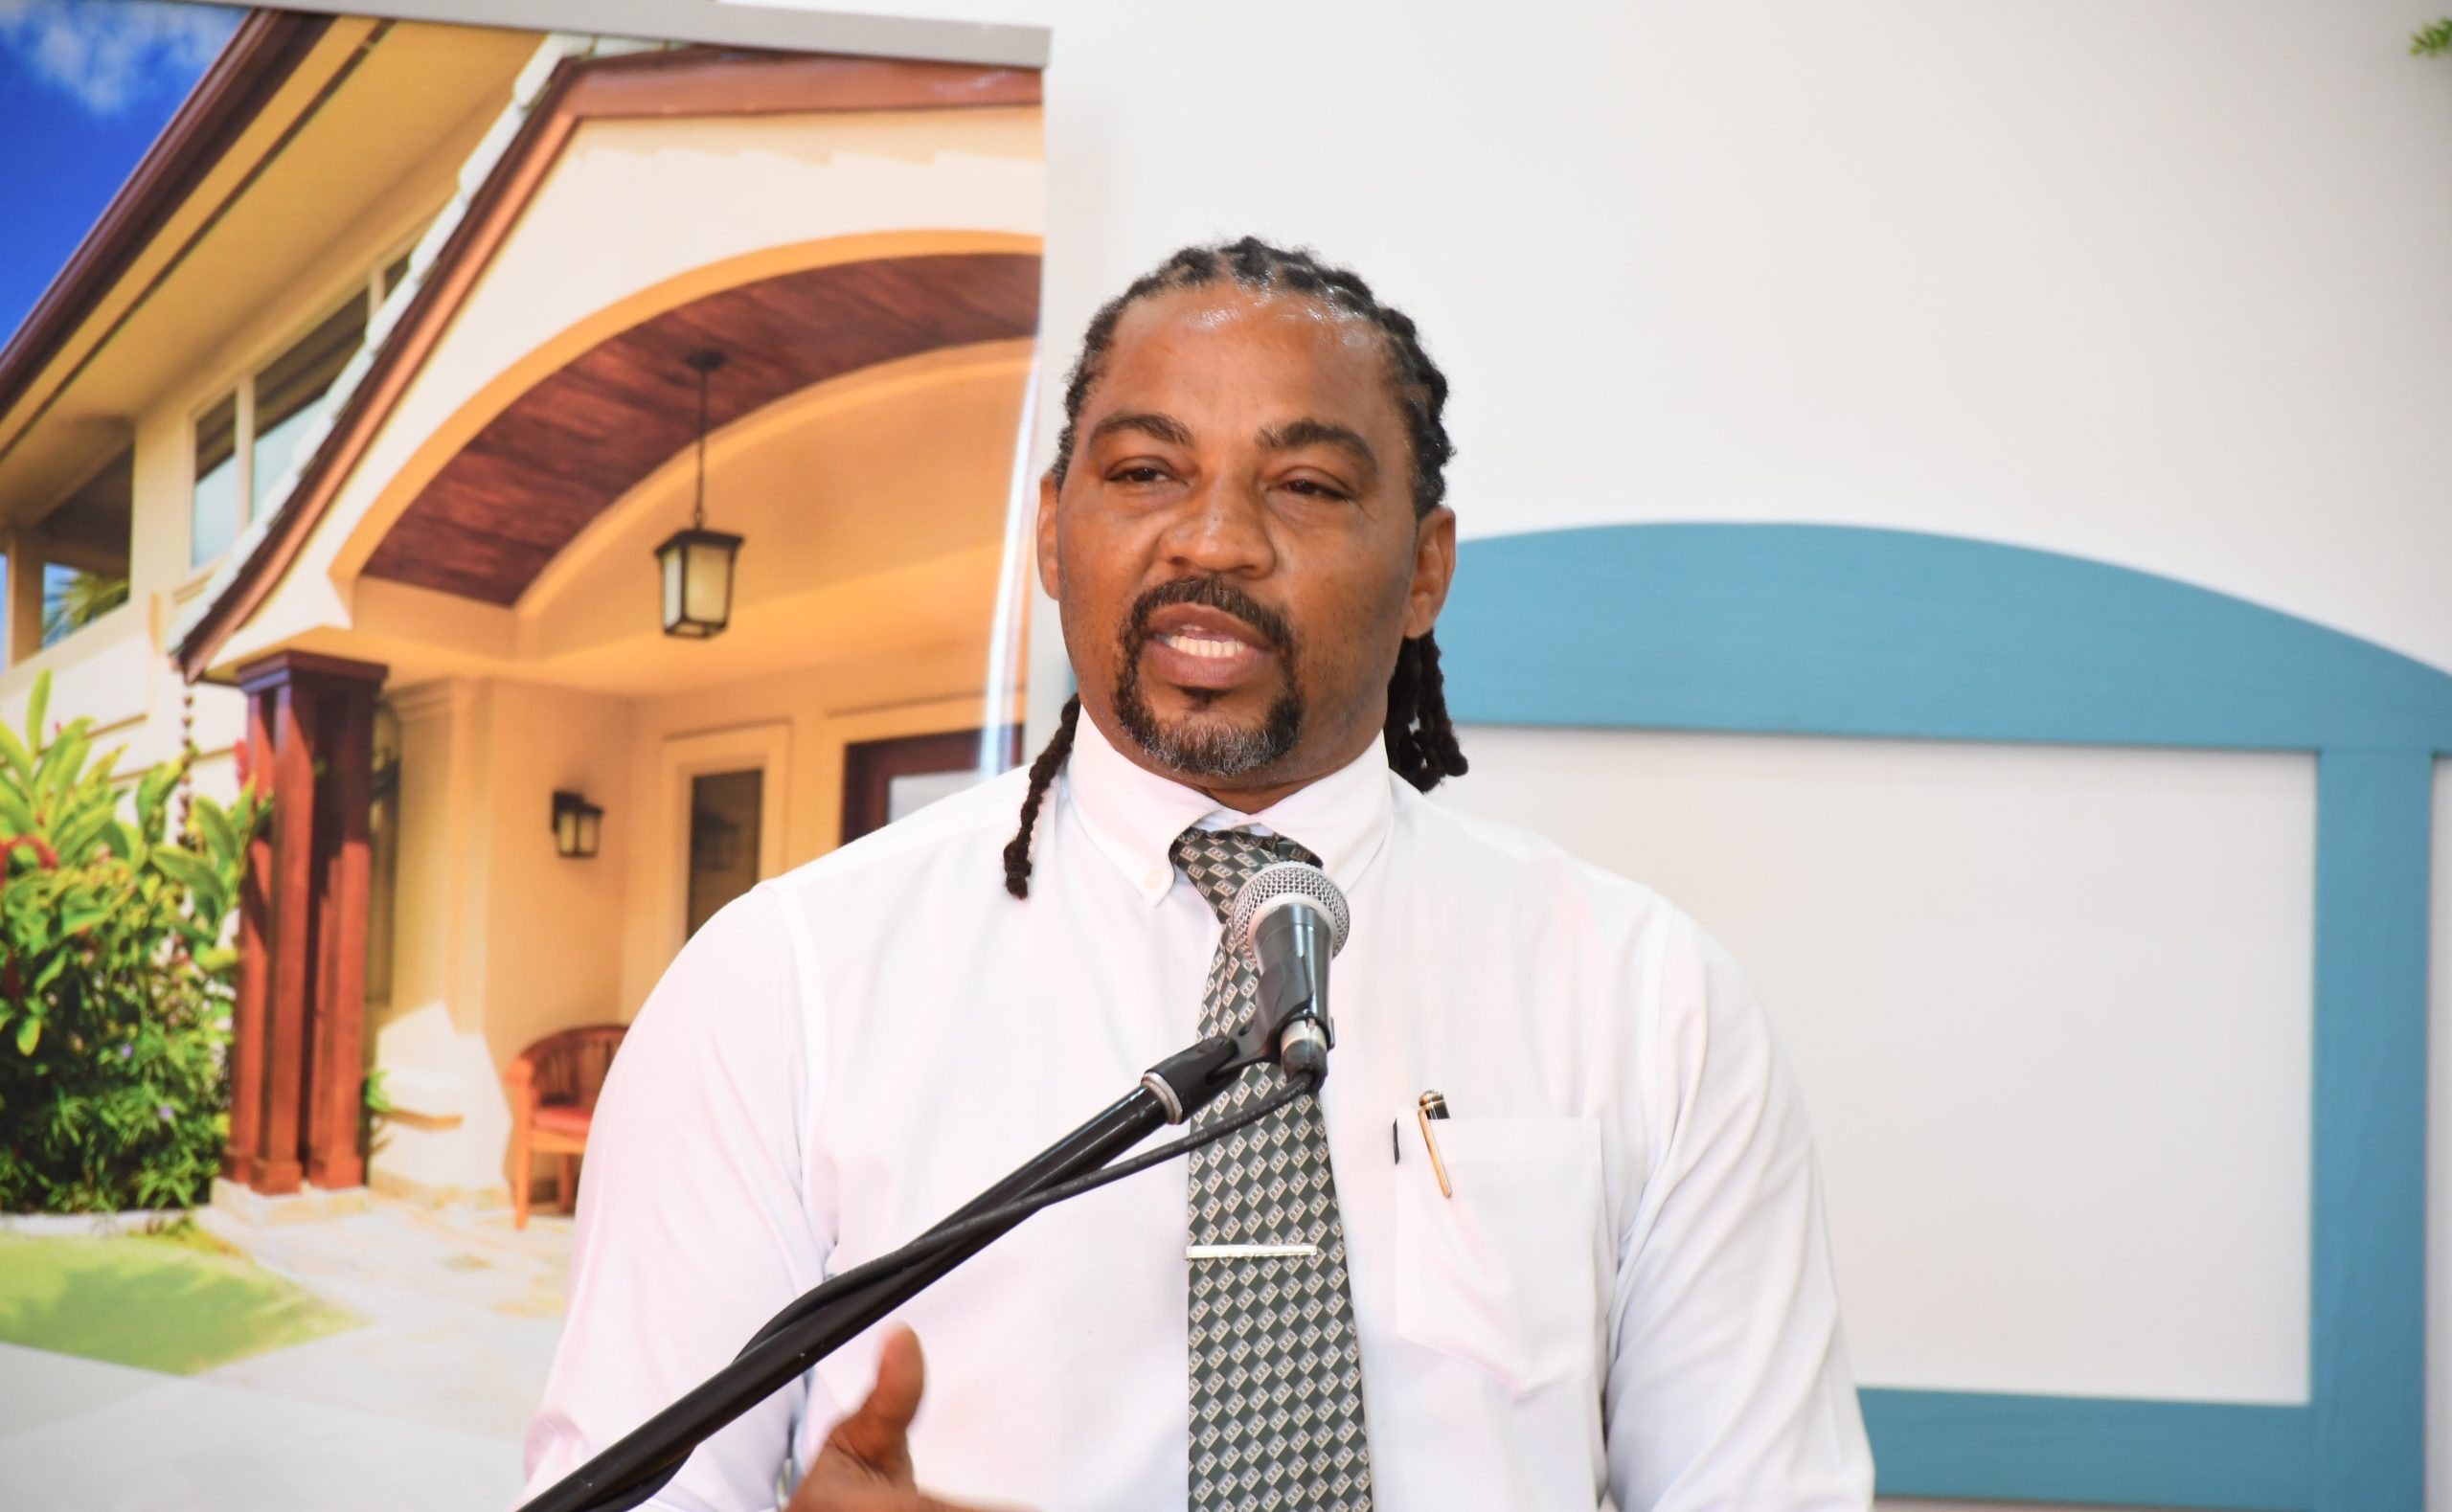 Minister of Housing Encourages Aspiring Homeowners to Access Government Housing Programmes